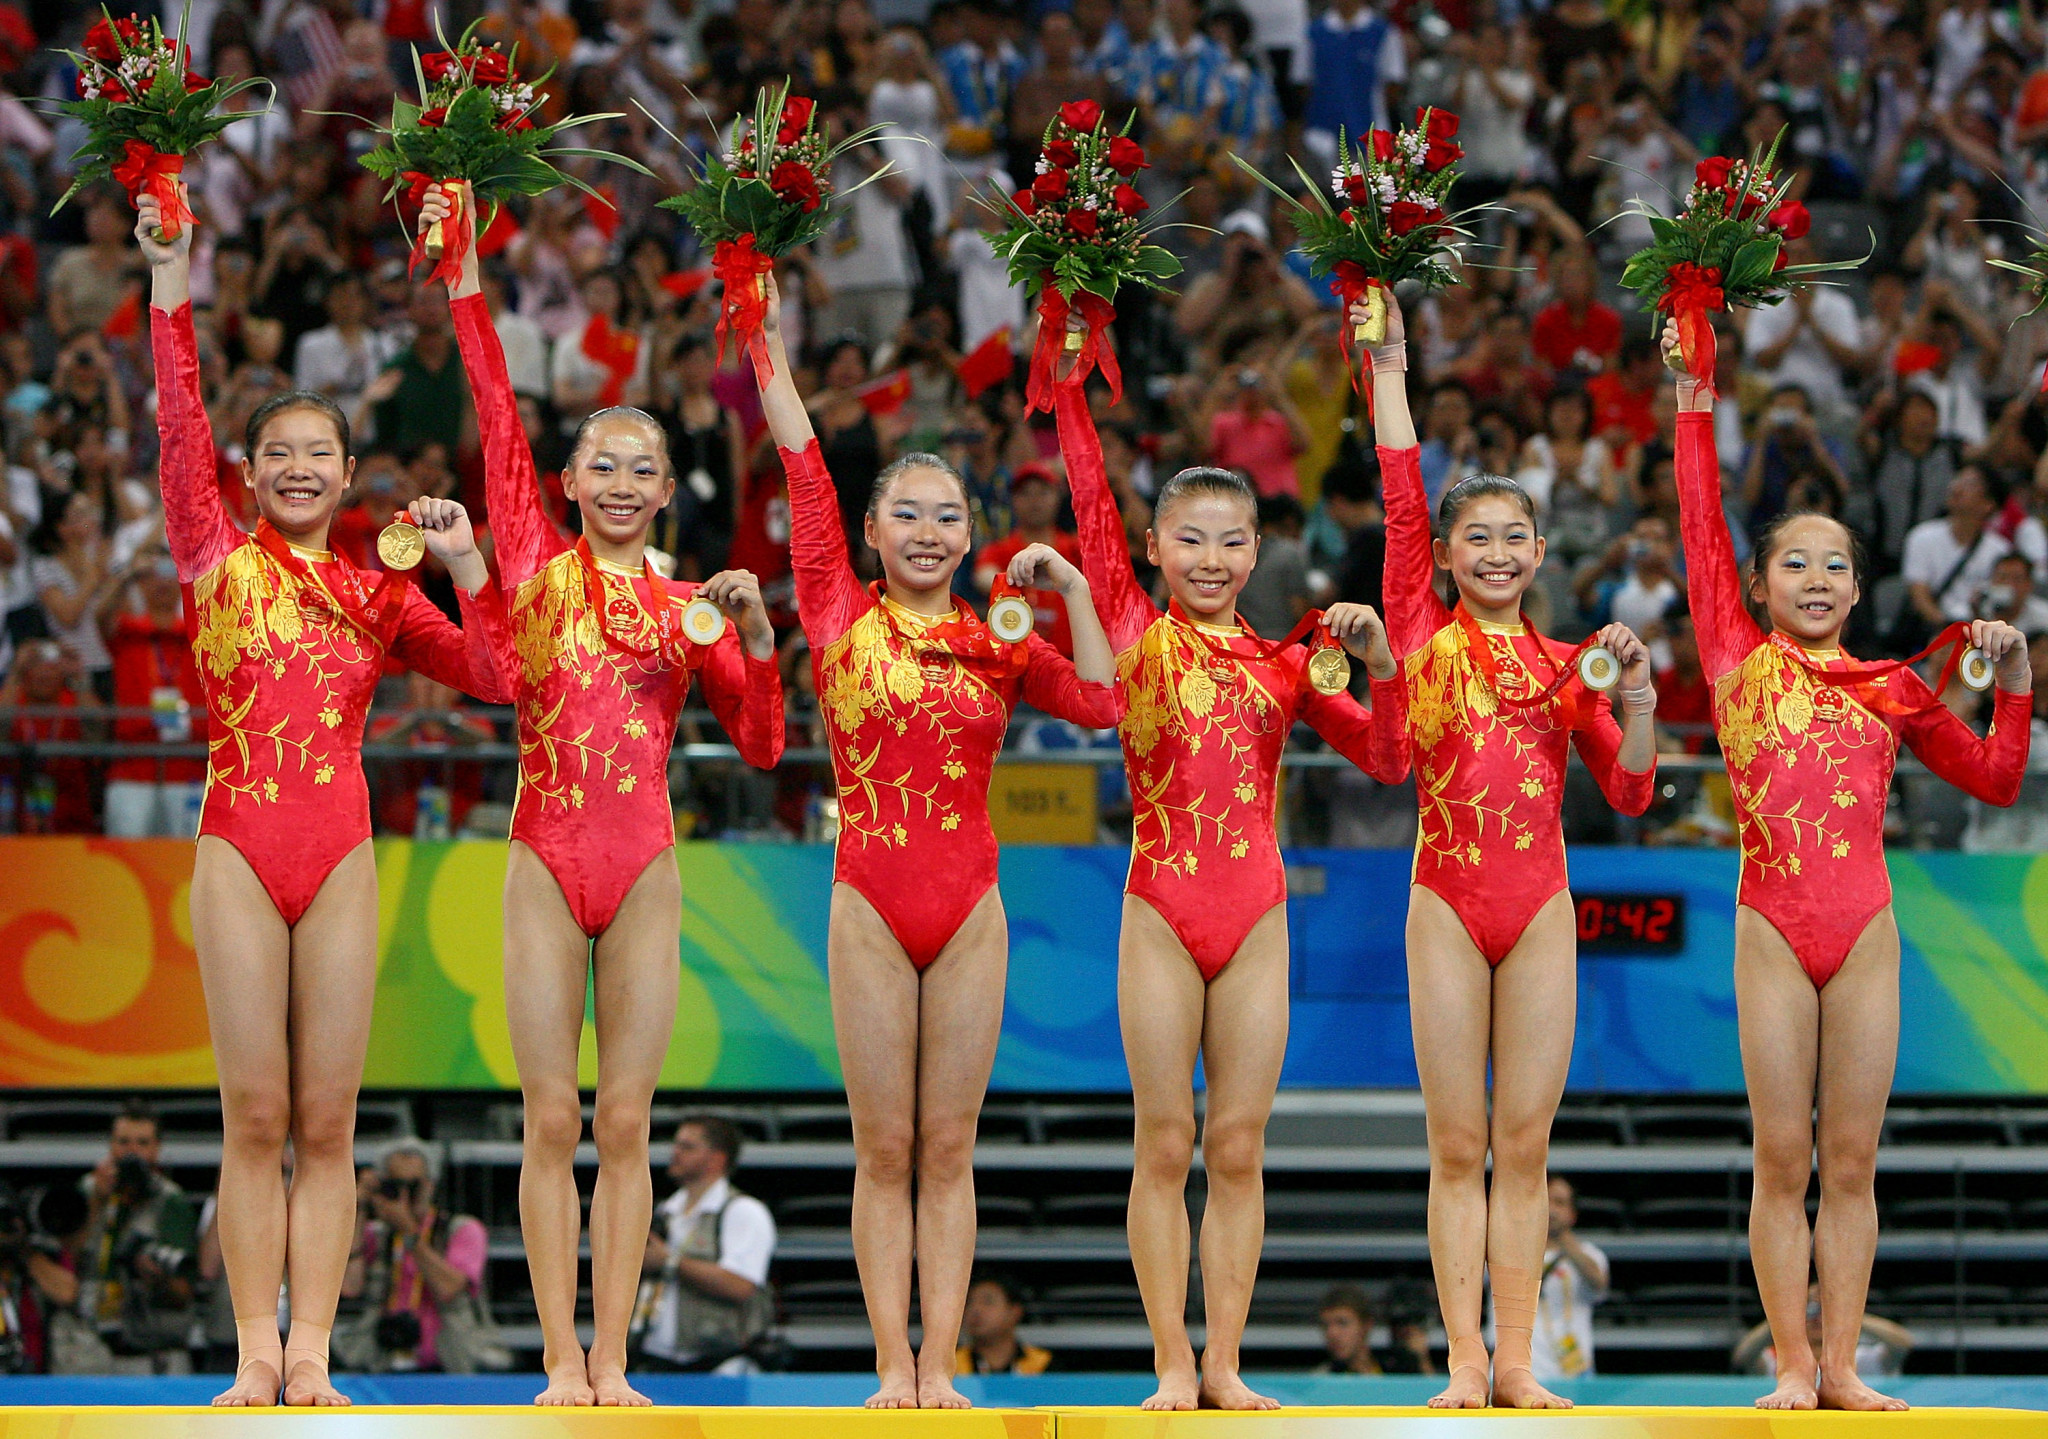 Lu Shanzhen coached China to the women's team gold at Beijing 2008, with their success overshadowed by claims some members were below the minimum age ©Getty Images